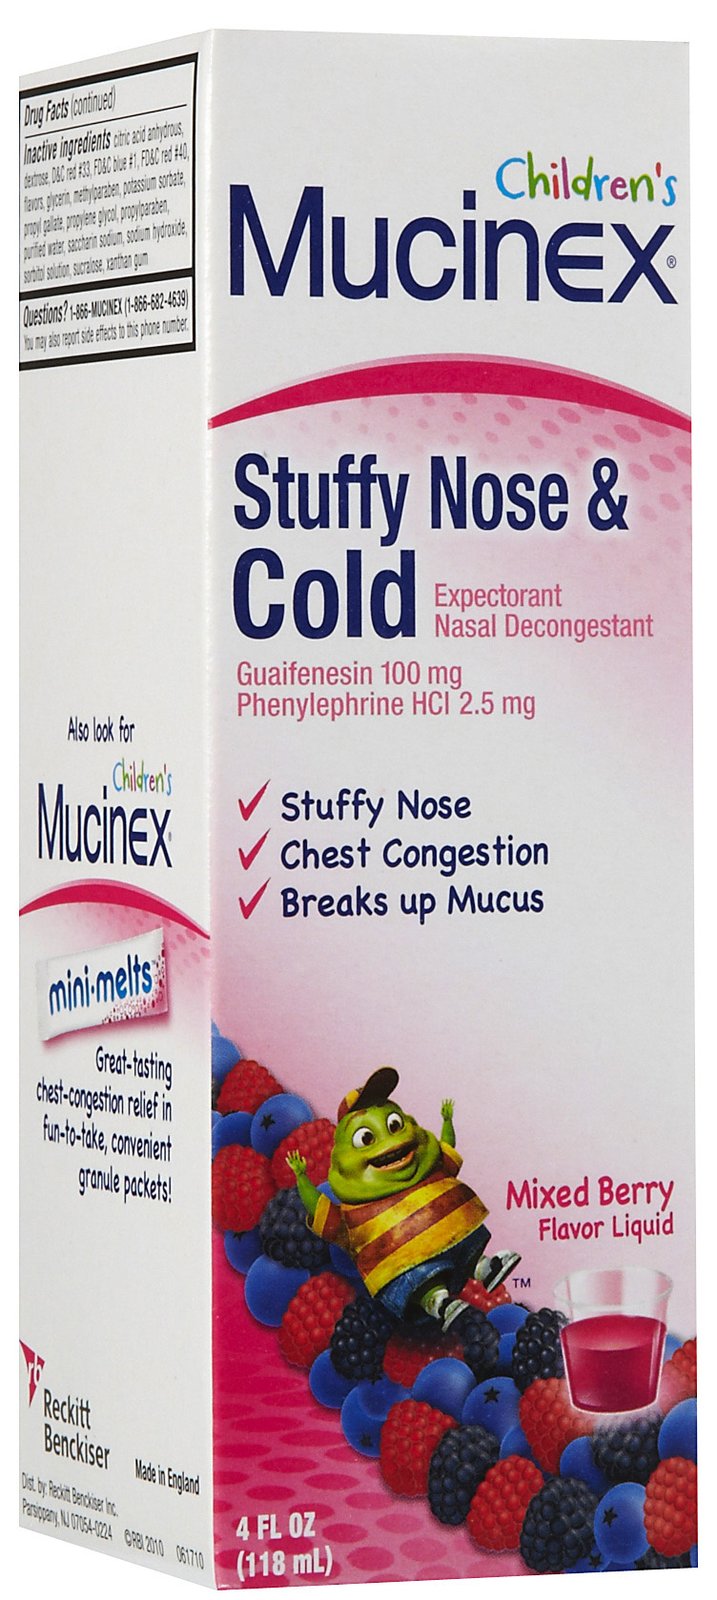 Possible Free Childrens Mucinex from Smiley360